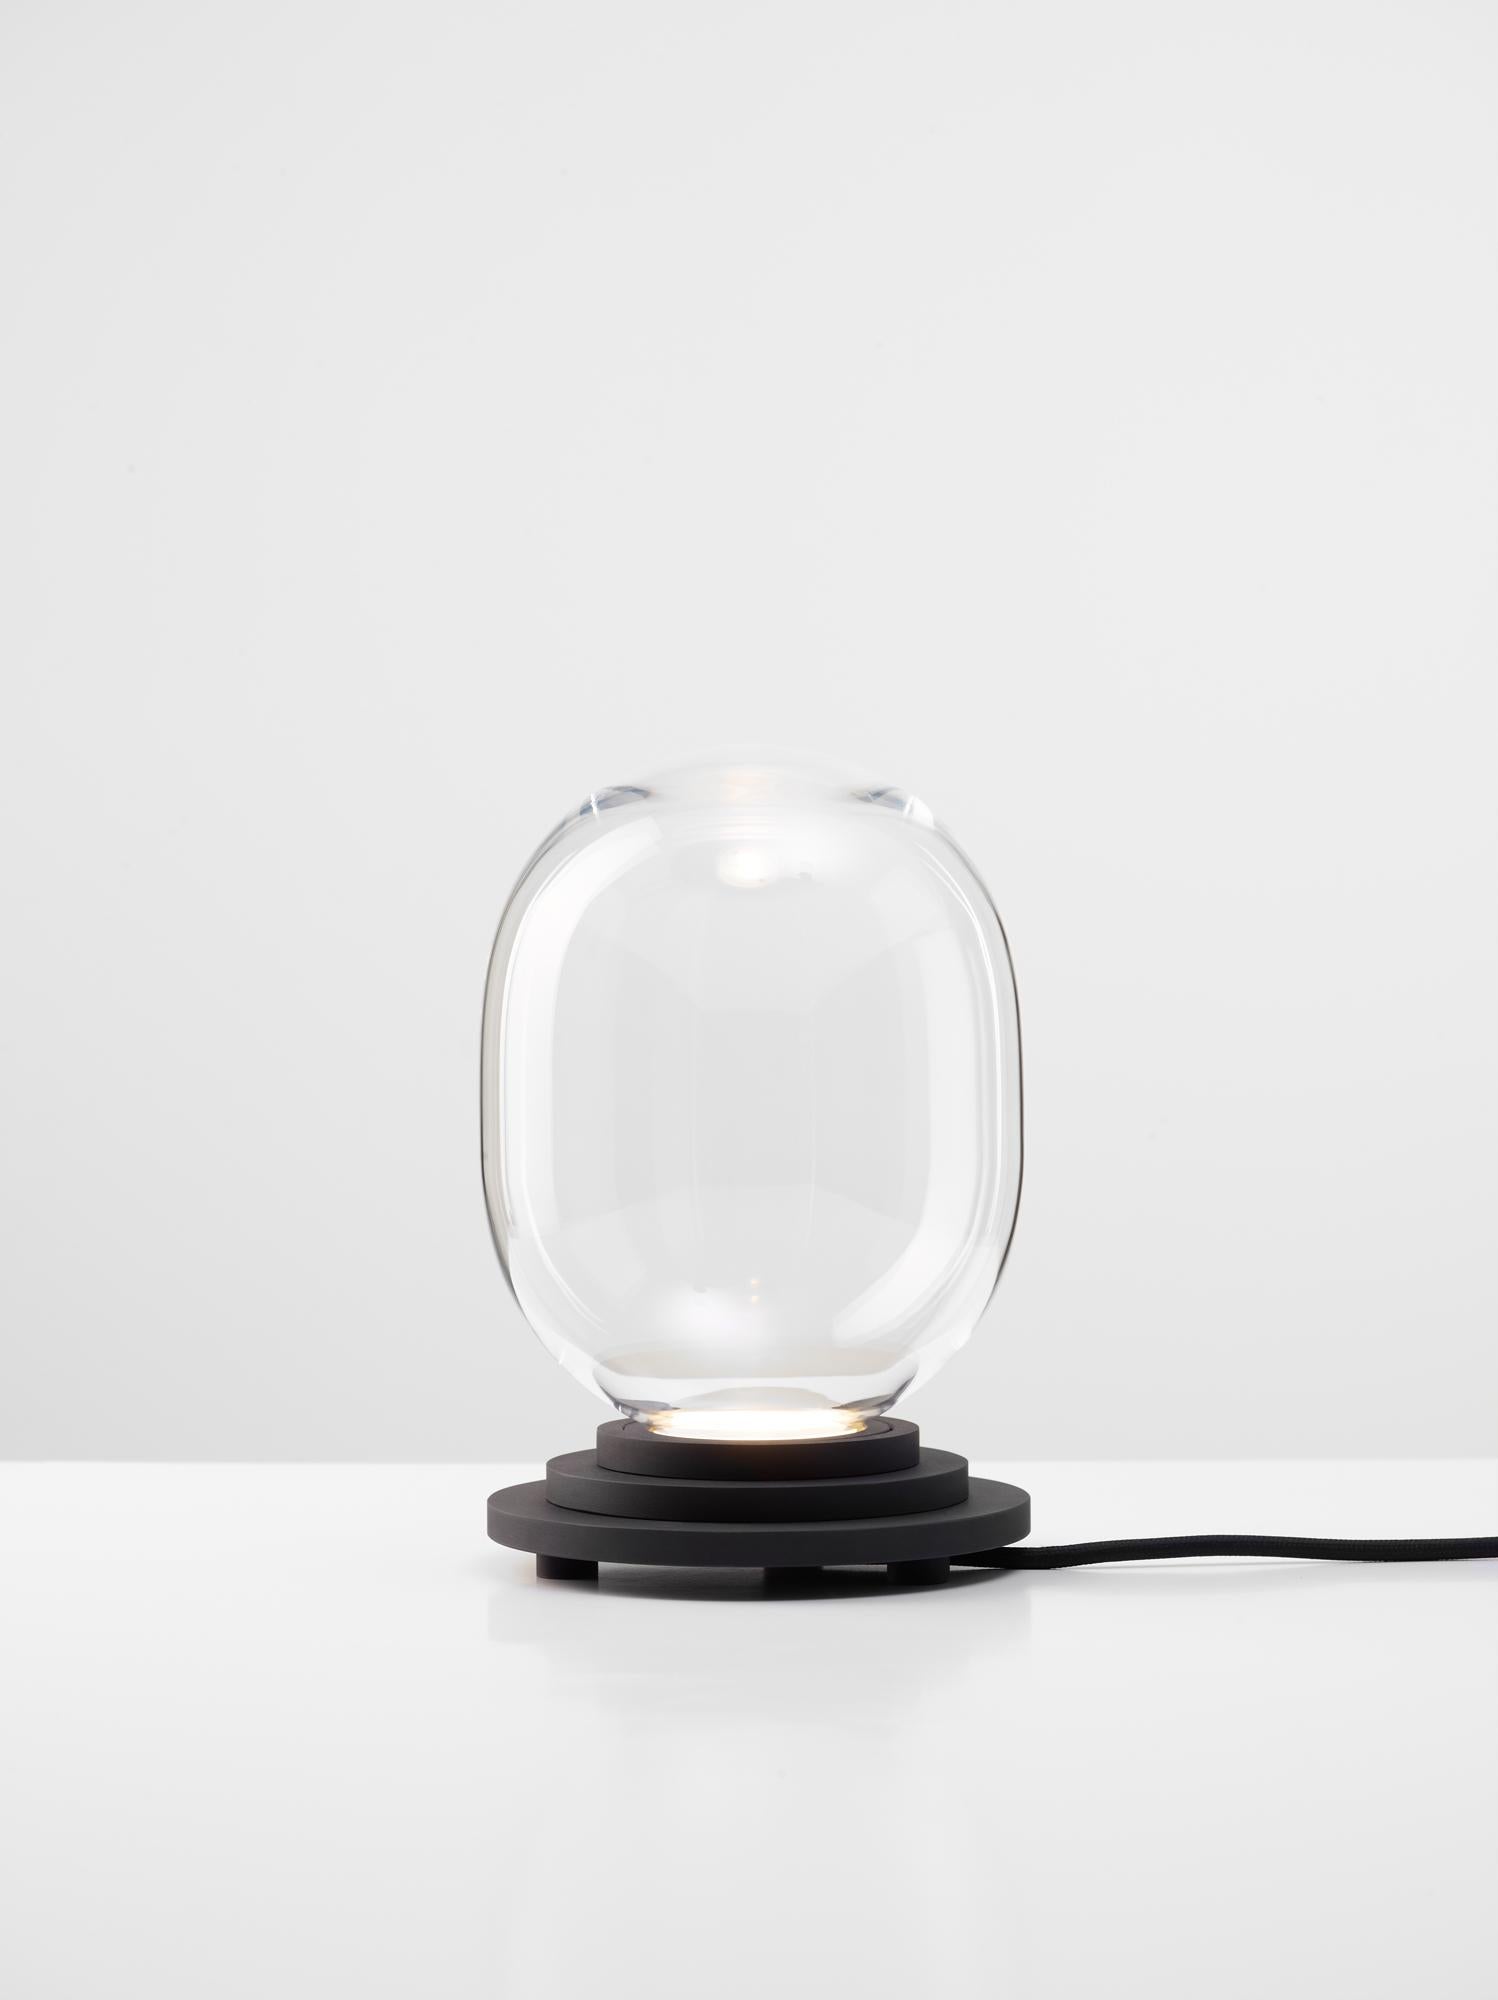 Black and clear Stratos Capsule table light by Dechem Studio
Dimensions: D 15 x H 22 cm
Materials: Aluminum, Glass.
Also available: Different colours available,

Different shapes of capsules and spheres contrast with anodized alloy fixtures,